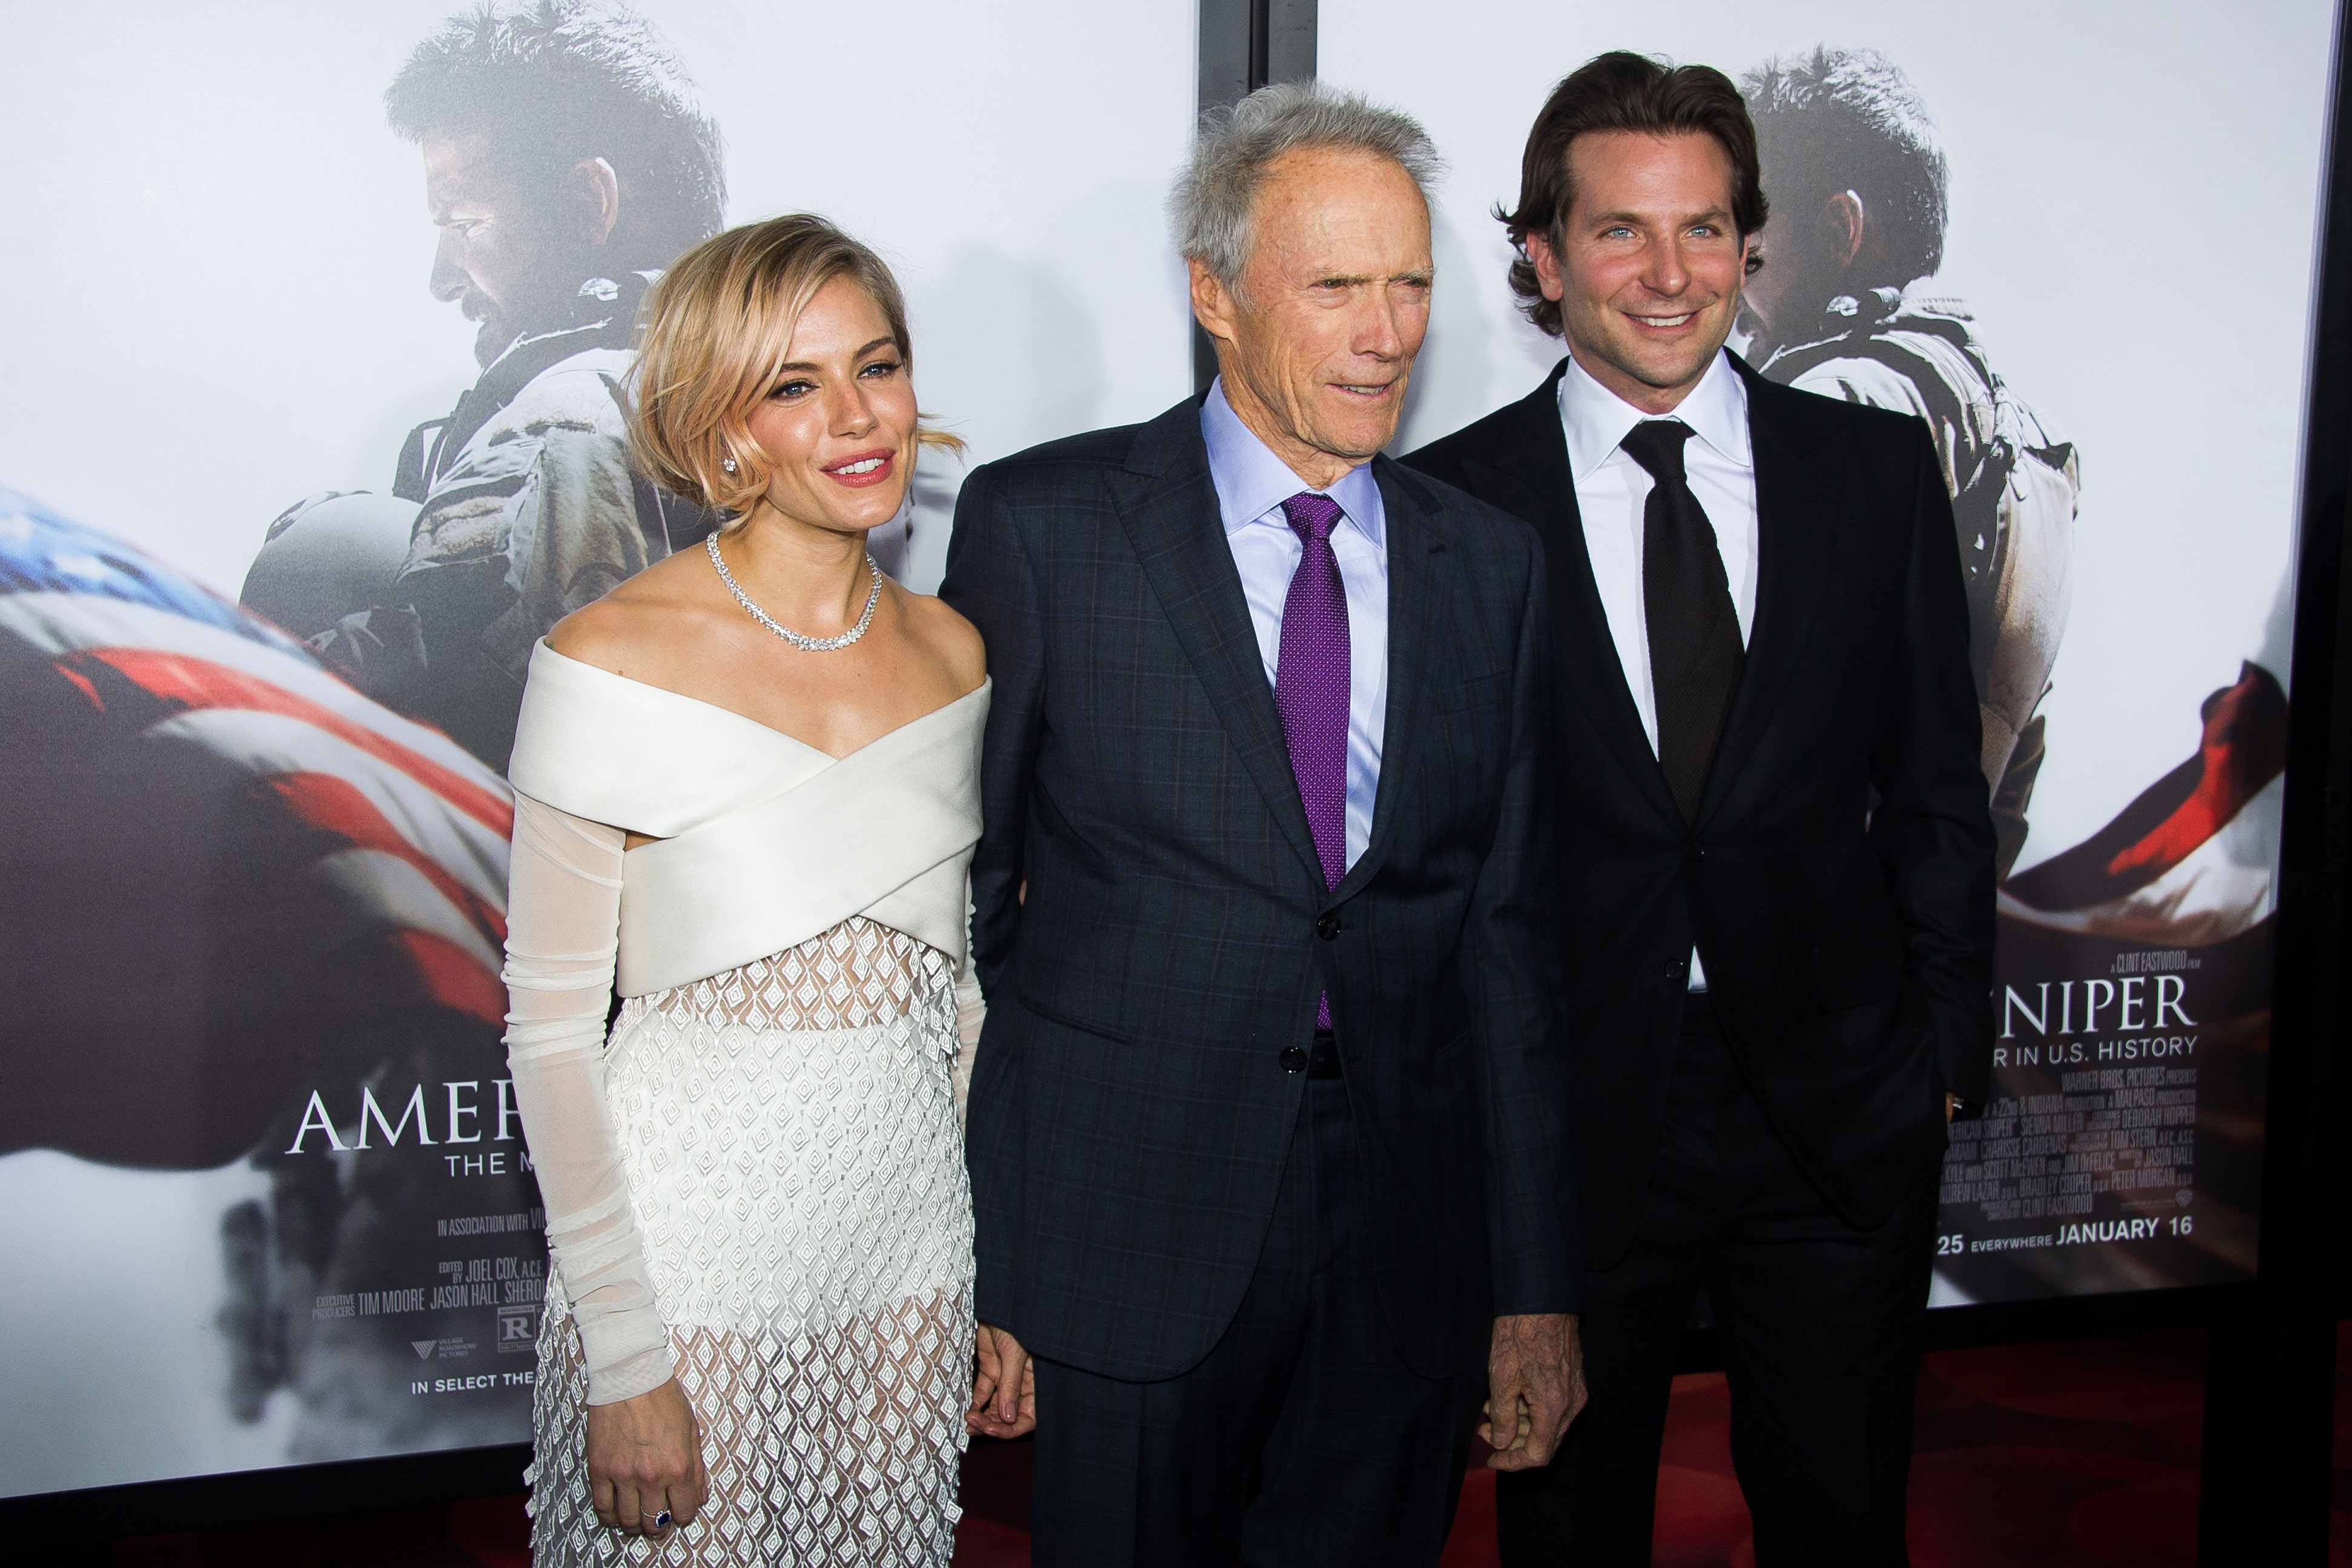 Sienna Miller, from left, Clint Eastwood and Bradley Cooper attend the "American Sniper" premiere on Monday, Dec. 15, 2014 in New York. (Photo by Charles Sykes/Invision/AP) (Charles Sykes&mdash;Charles Sykes/Invision/AP)